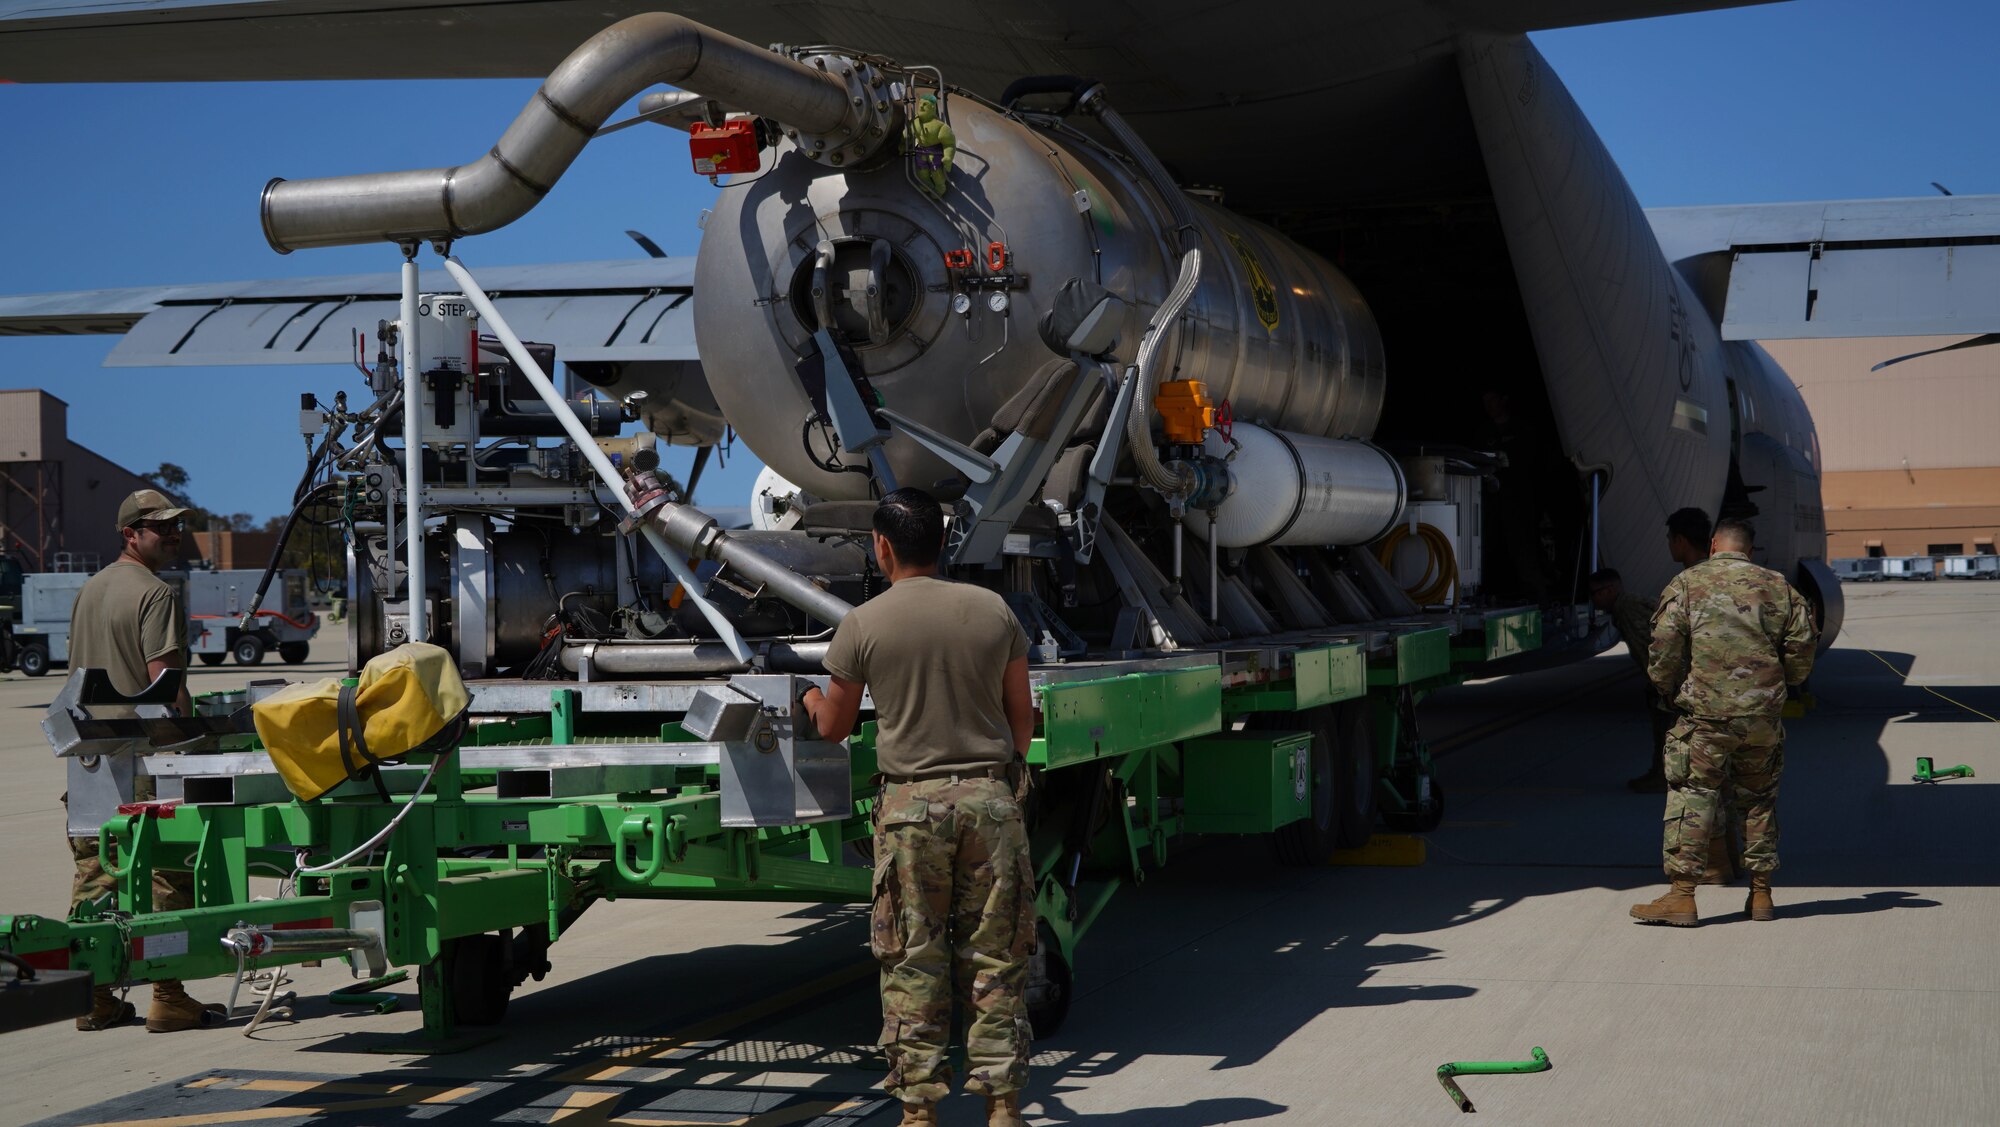 U.S. Air Force personnel from the 146th Airlift Wing load the U.S. Forest Service's Modular Airborne Firefighting System (MAFFS) inside a C-130J Super Hercules aircraft